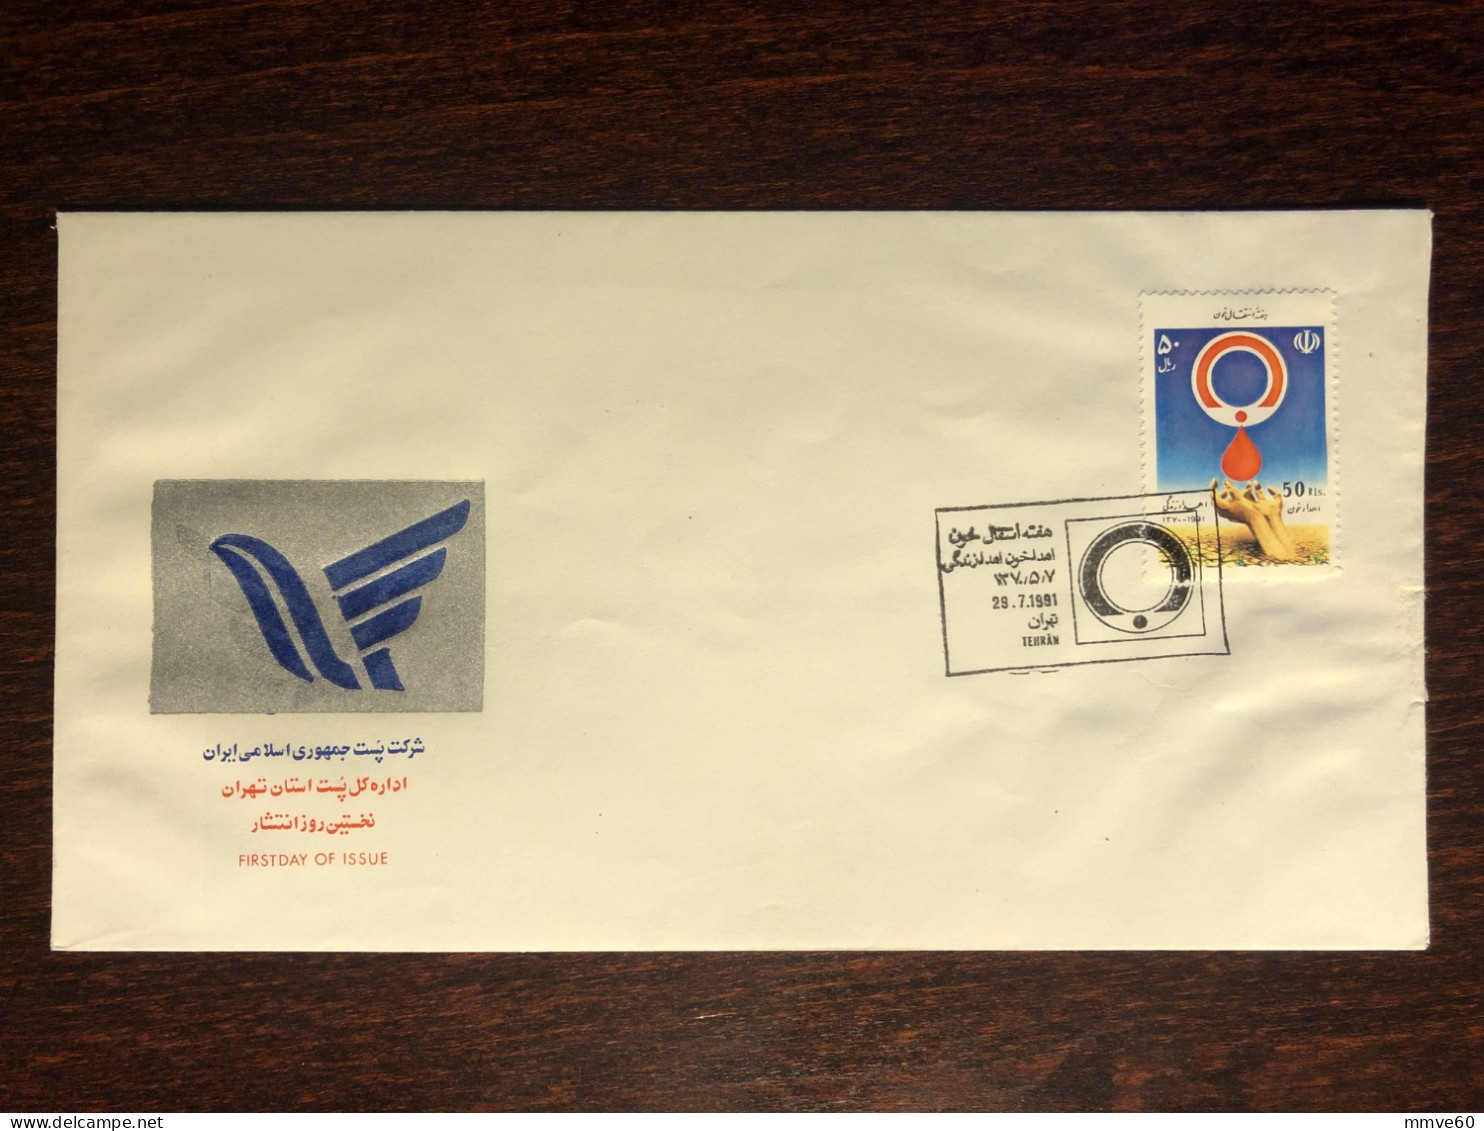 IRAN FDC COVER 1991 YEAR BLOOD DONATION DONORS HEALTH MEDICINE STAMPS - Iran